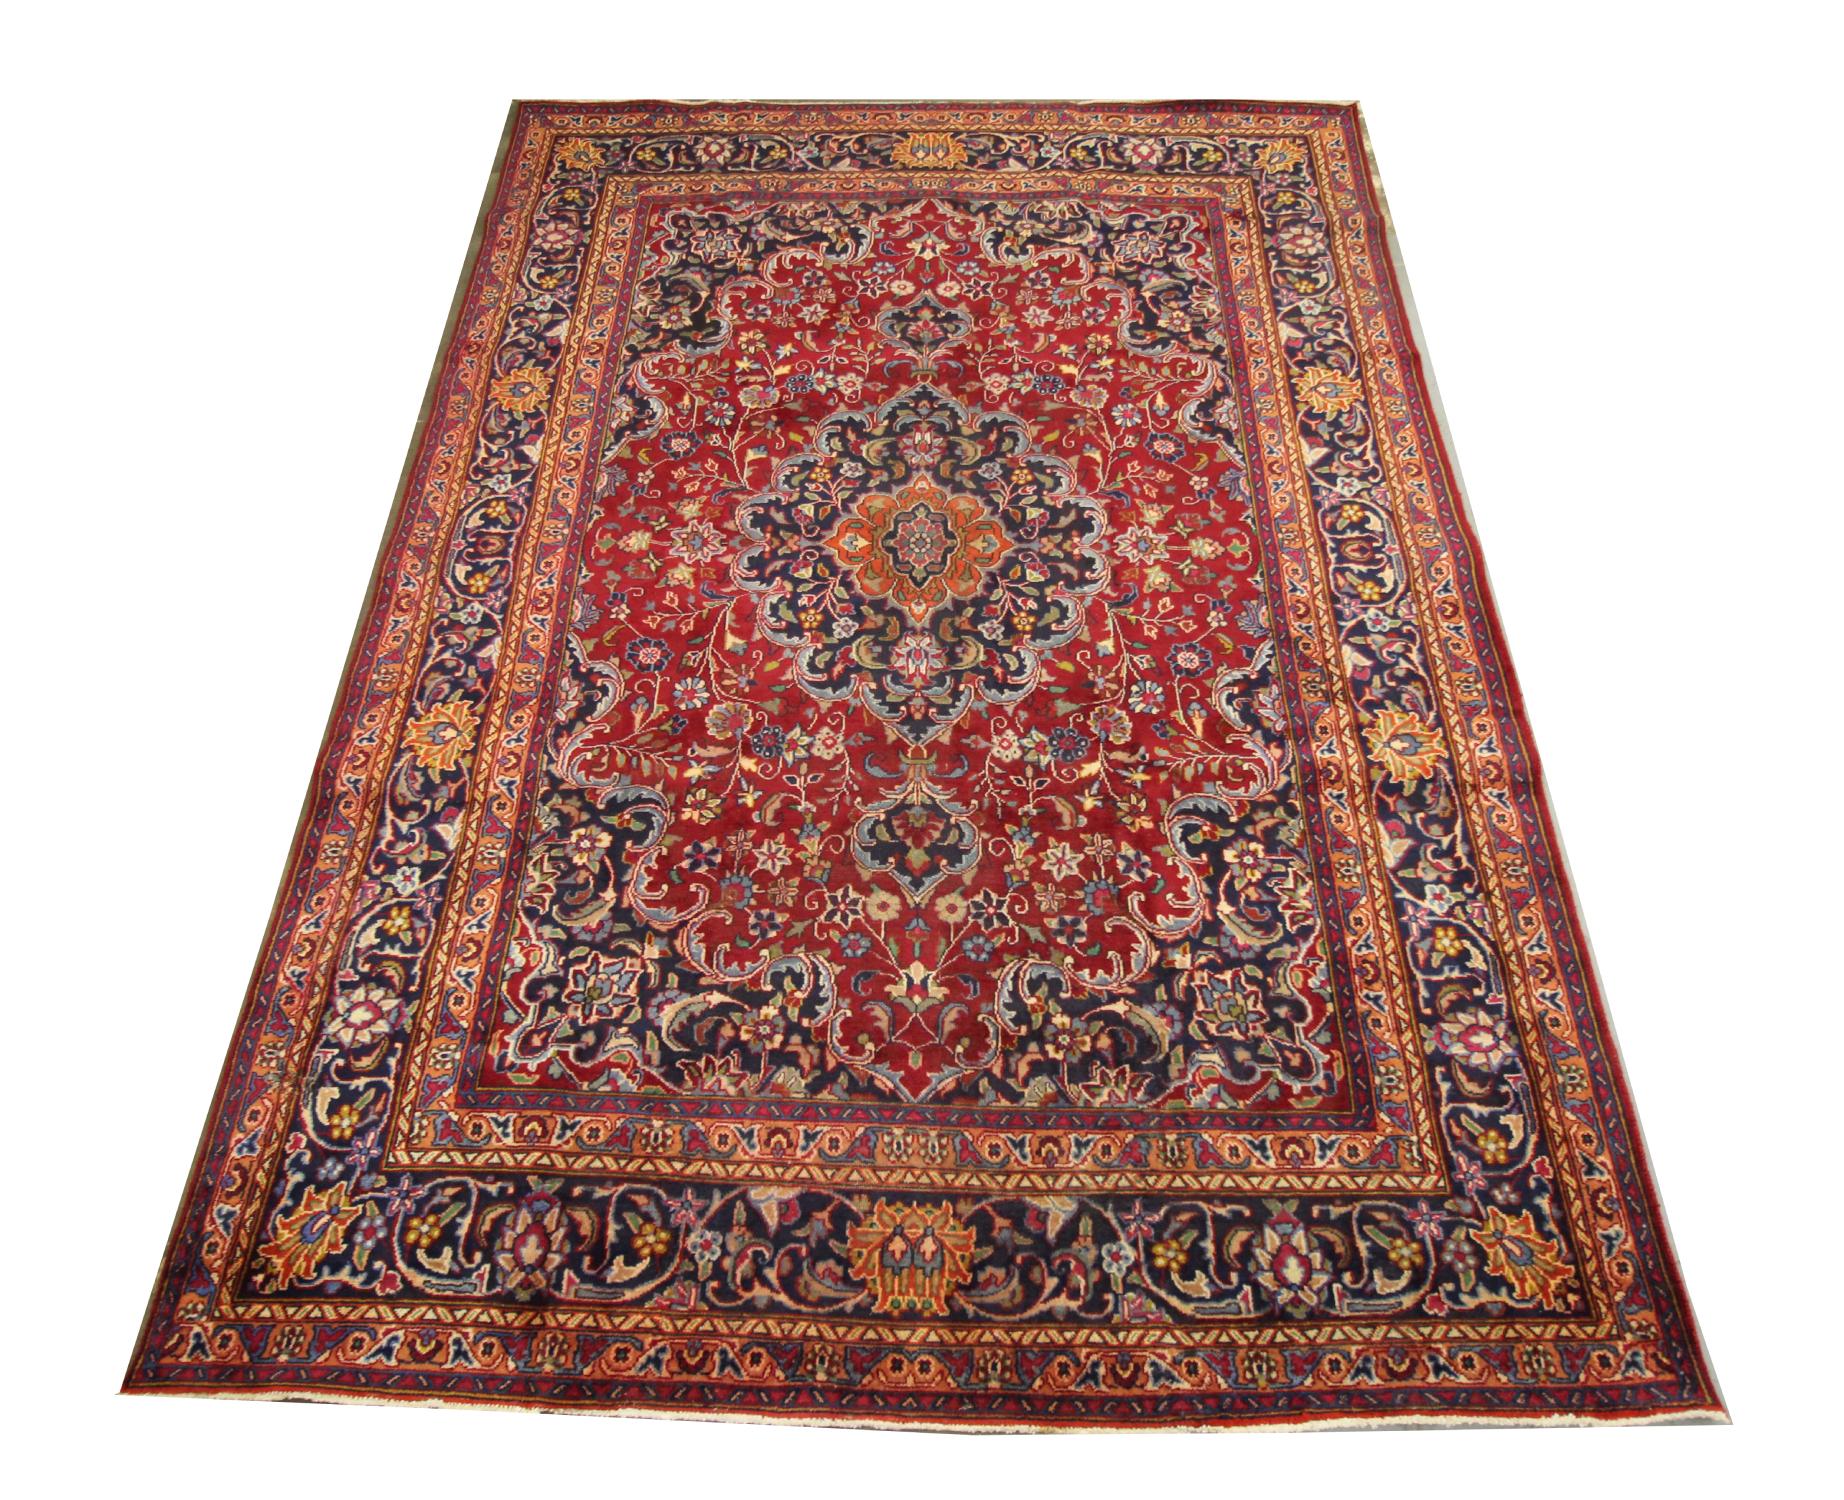 This unique wool area rug is a fantastic example of Turkish carpets woven in the late 20th century, circa 1970. The design features a large medallion and highly-decorative surrounding design. Woven with a bold red background with blue, brown and